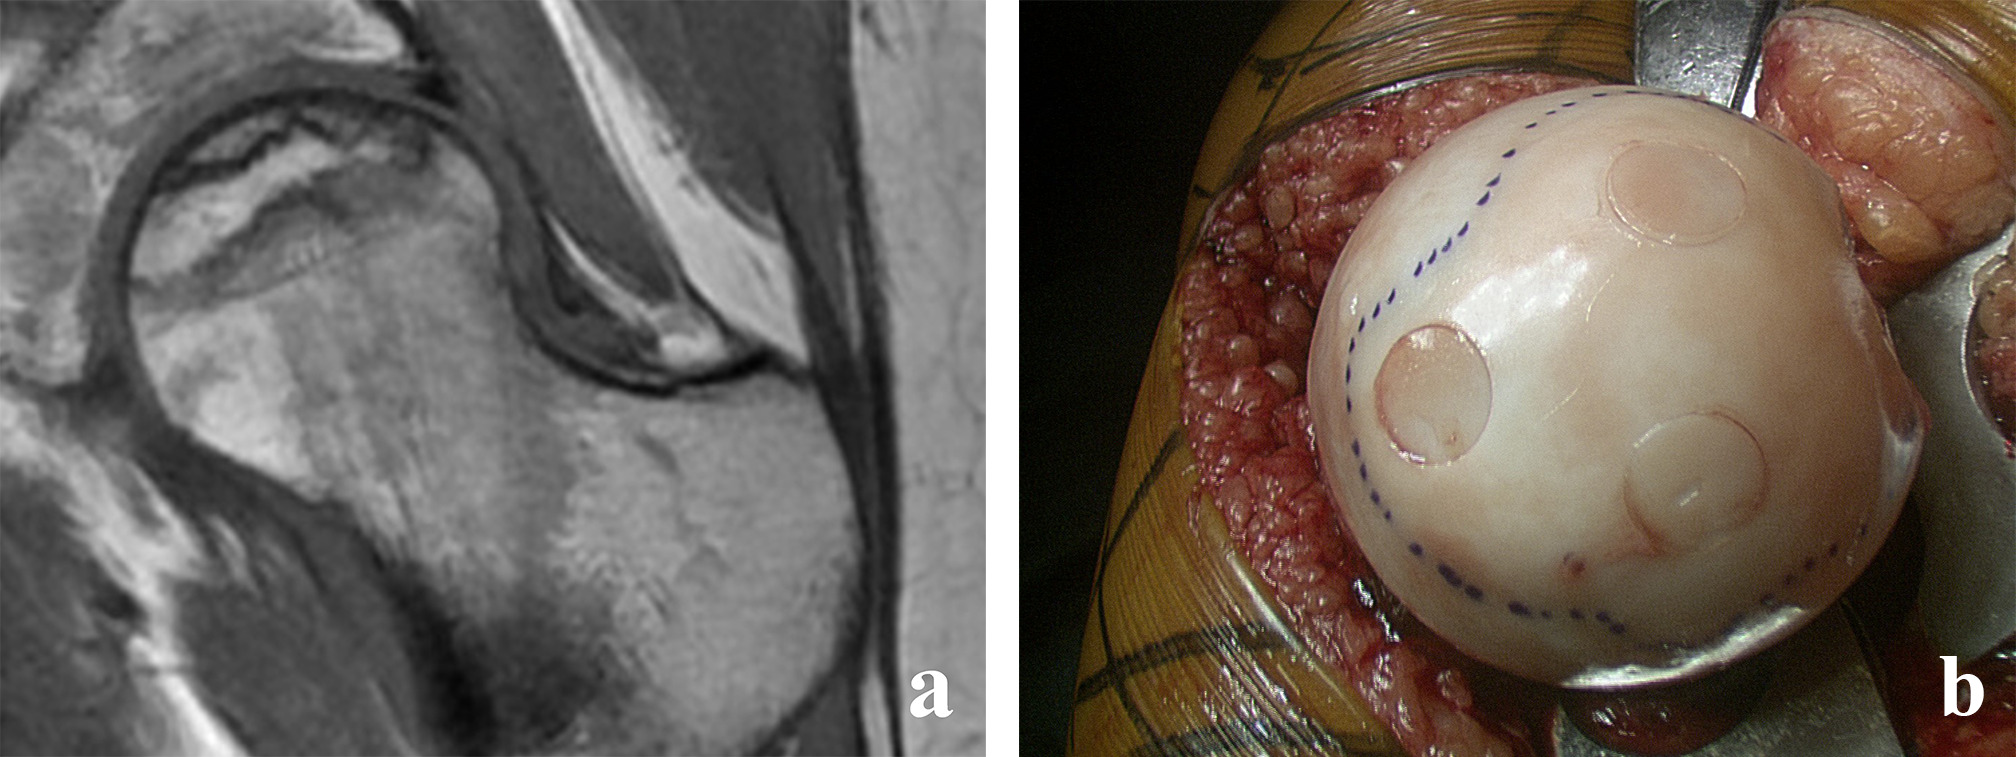 Fig. 3 
          a) Preoperative coronal MRI of a 22-year-old female patient with lupus erythematosus presenting with stage IIB avascular necrosis of the femoral head. b) Intraoperative view showing the stabilization of the necrotic area with careful implantation of three hip-to-hip transplants.
        